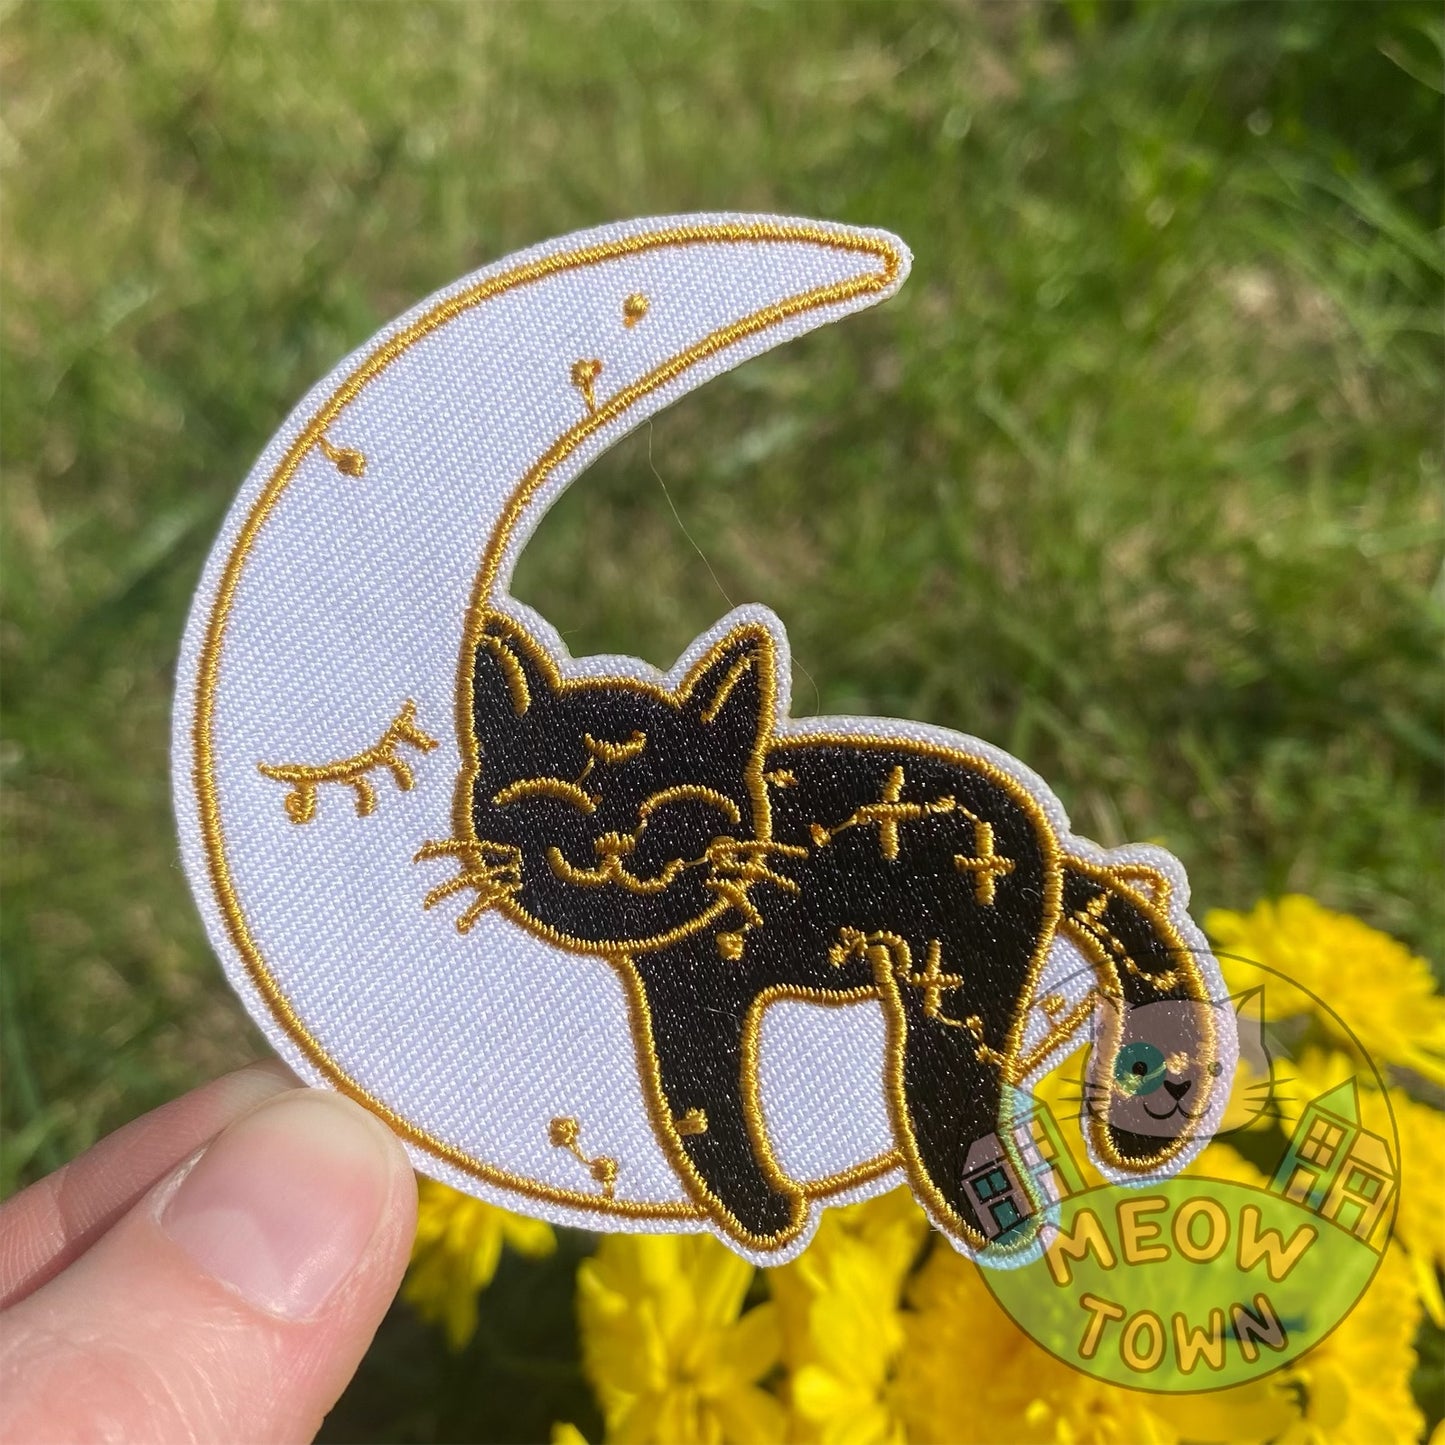 Funny embroidered iron-on patch with a cute kitty sleeping peacefully on the Moon :) A perfect way to bring new life to your old garments or to cover small holes or marks with this cute kitty!